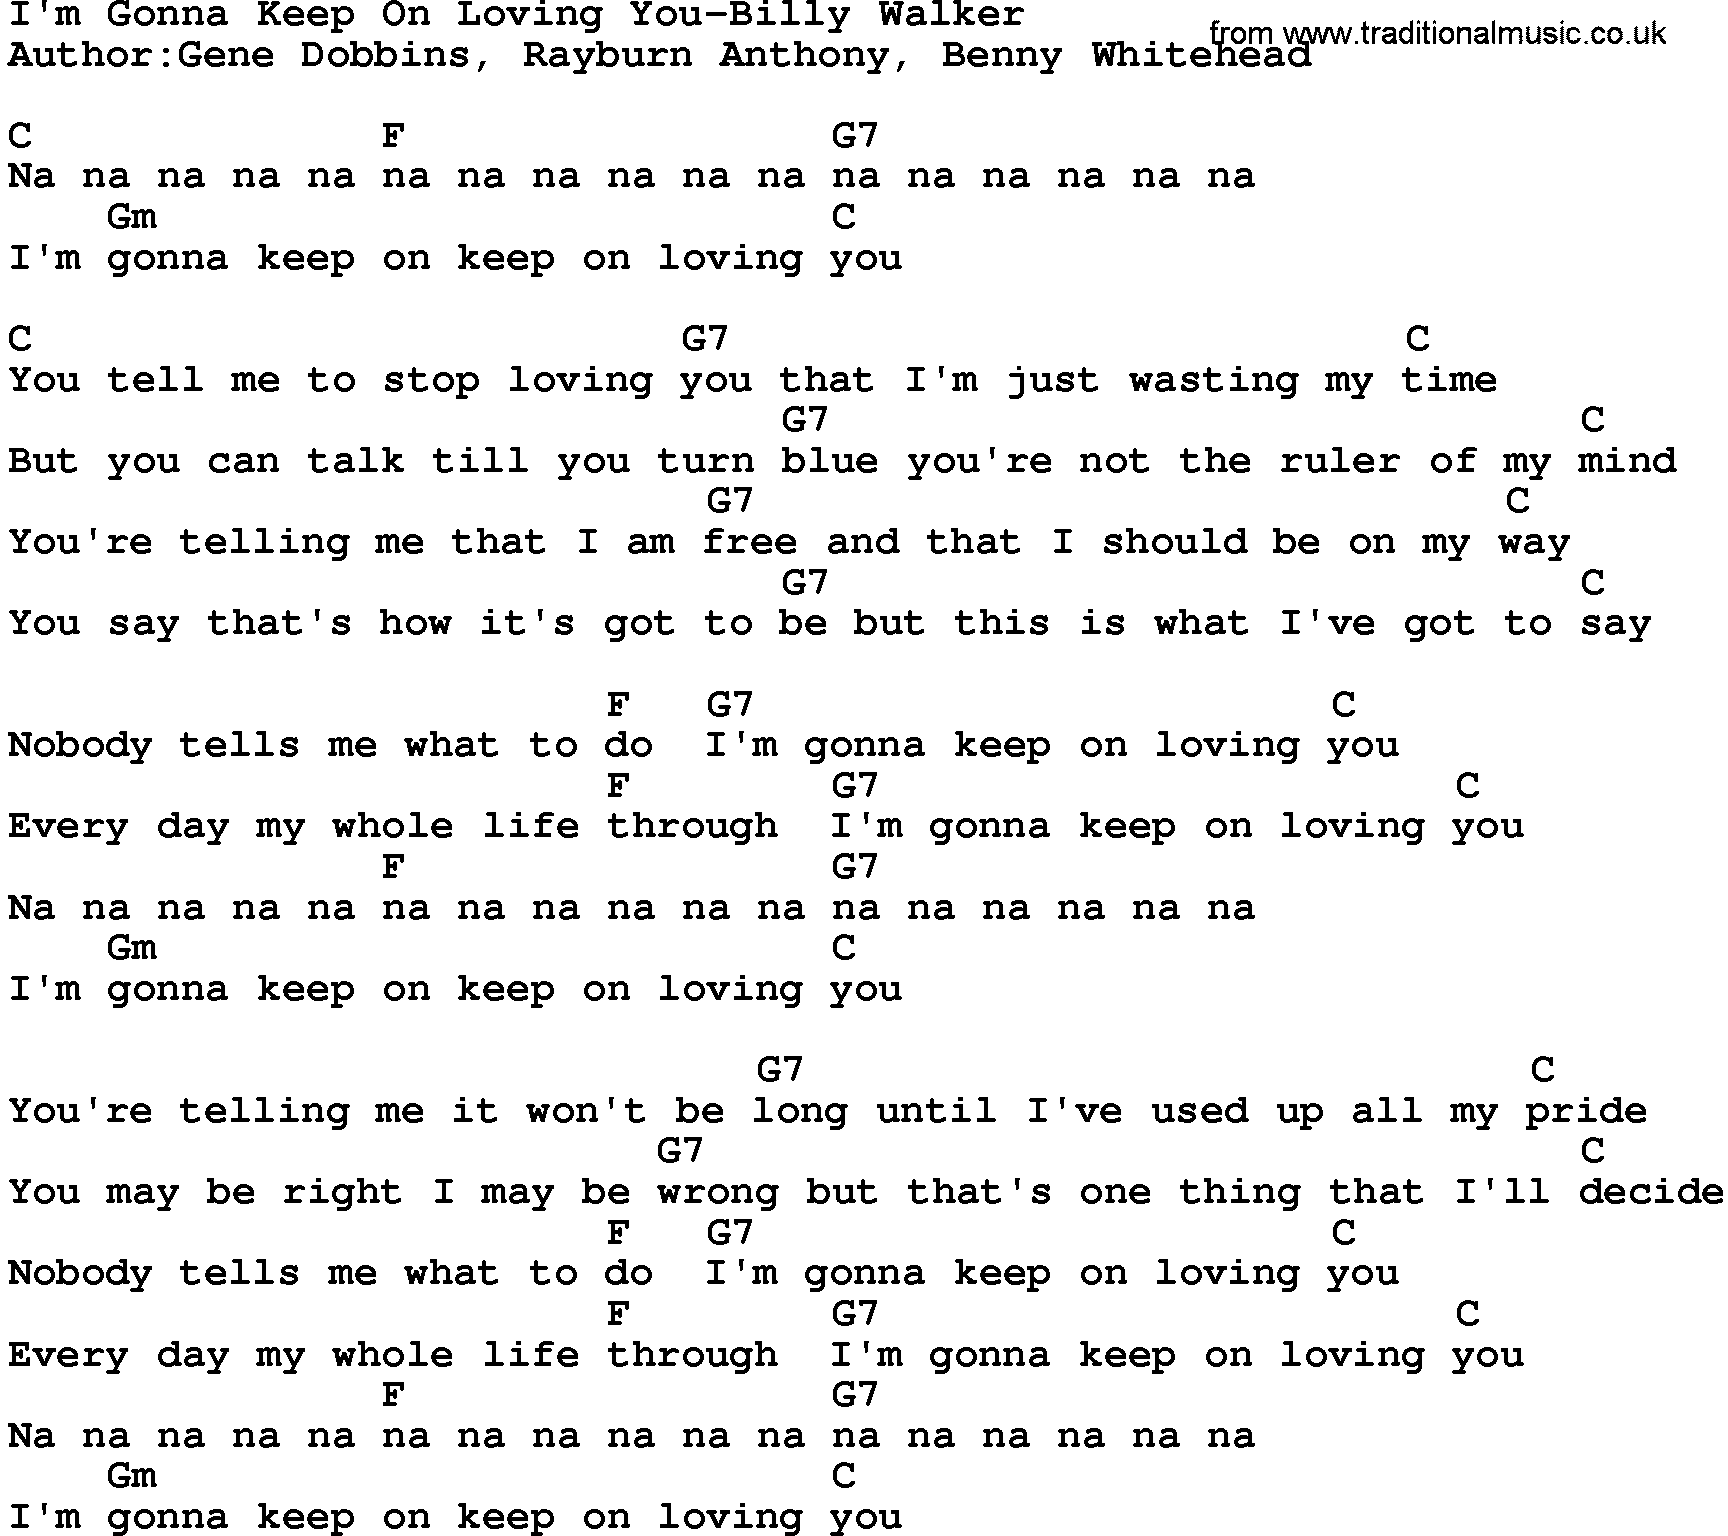 Country music song: I'm Gonna Keep On Loving You-Billy Walker lyrics and chords